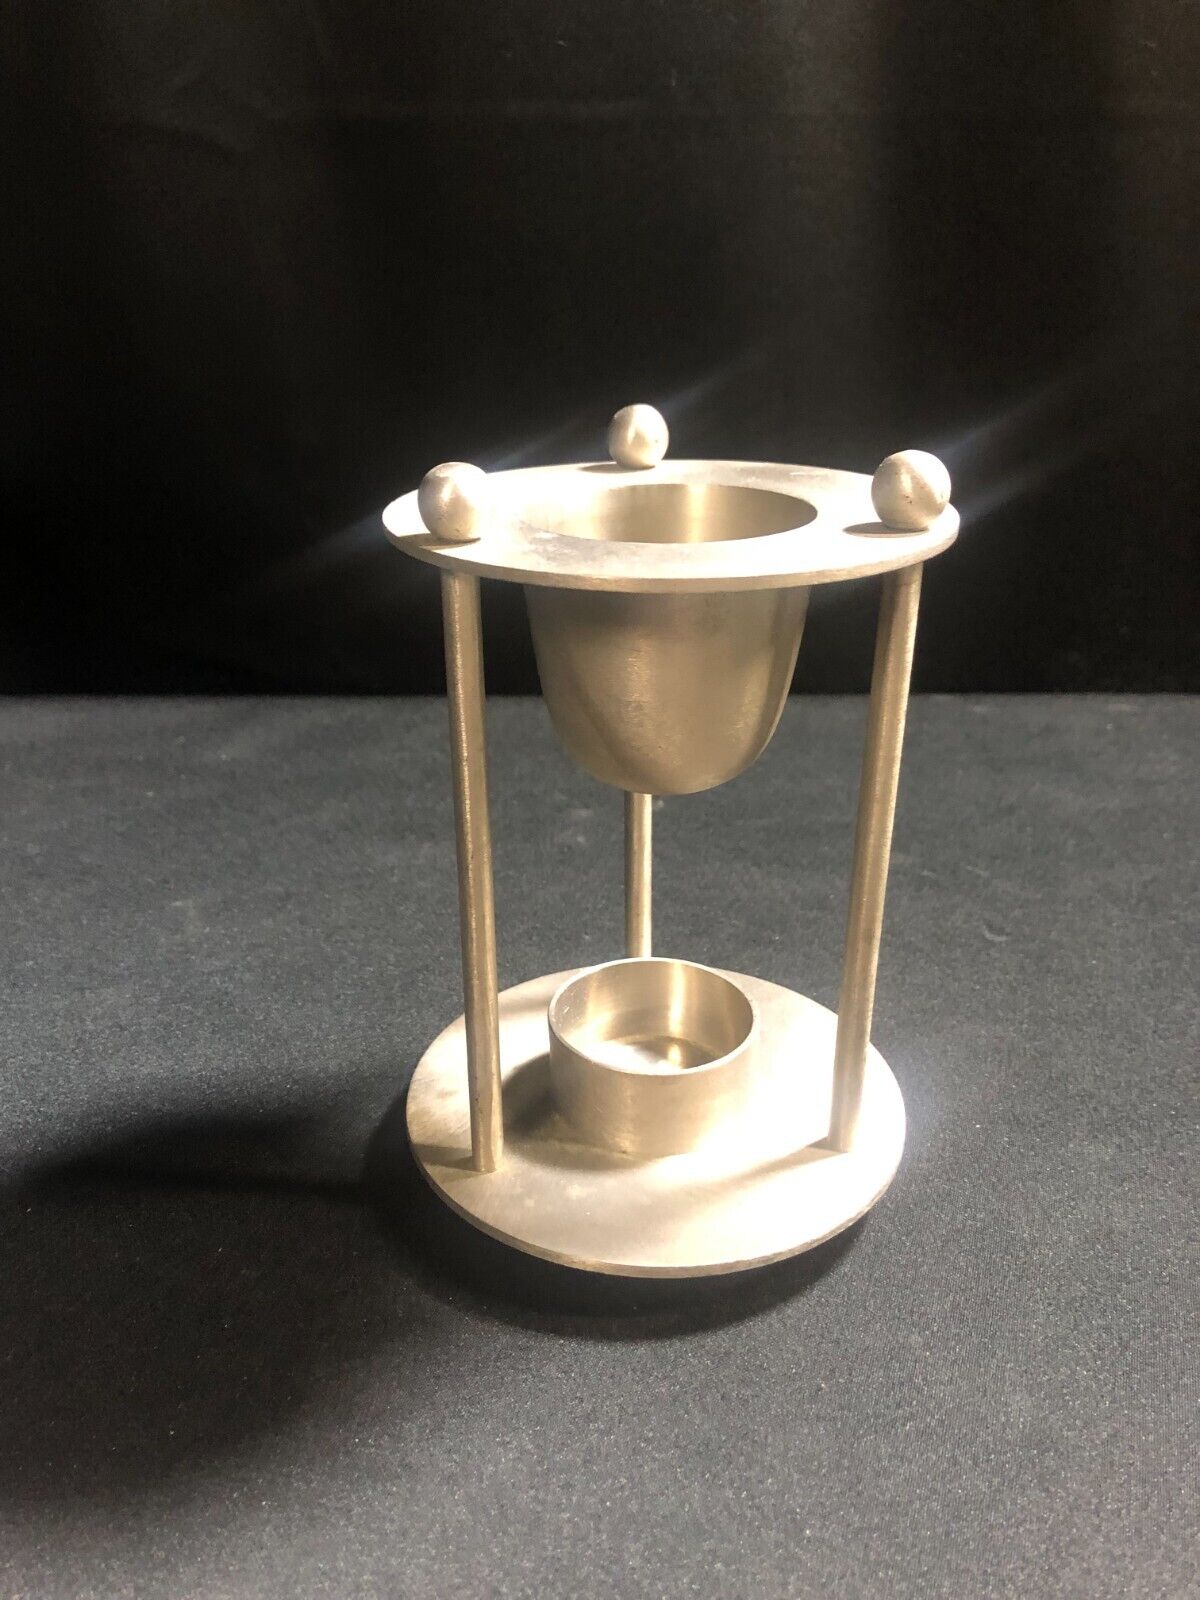 Vintage Unique Solid Nickel Warmer Stand with Tea Lite Candle Base-6x4x4